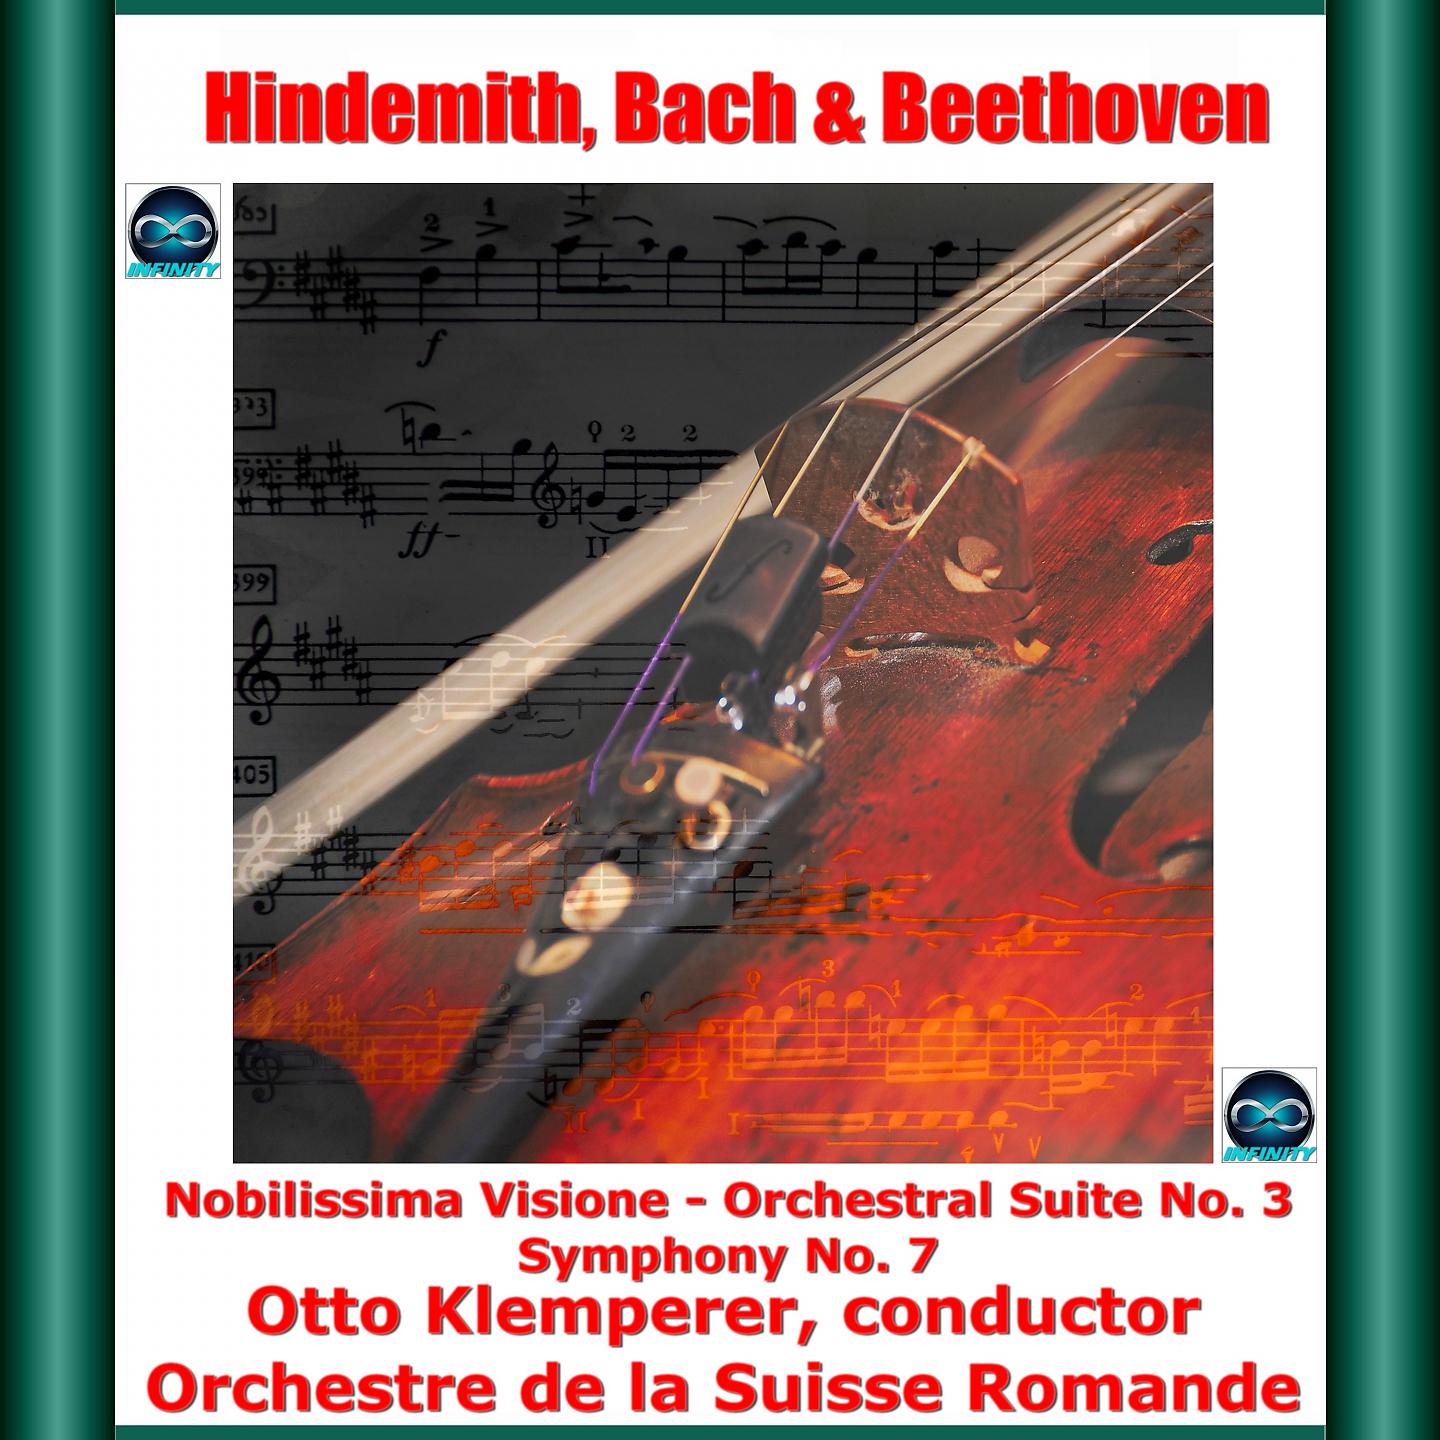 Постер альбома Hindemith, Bach & Beethoven: Nobilissima Visione - Orchestral Suite No. 3 - Symphony No. 7